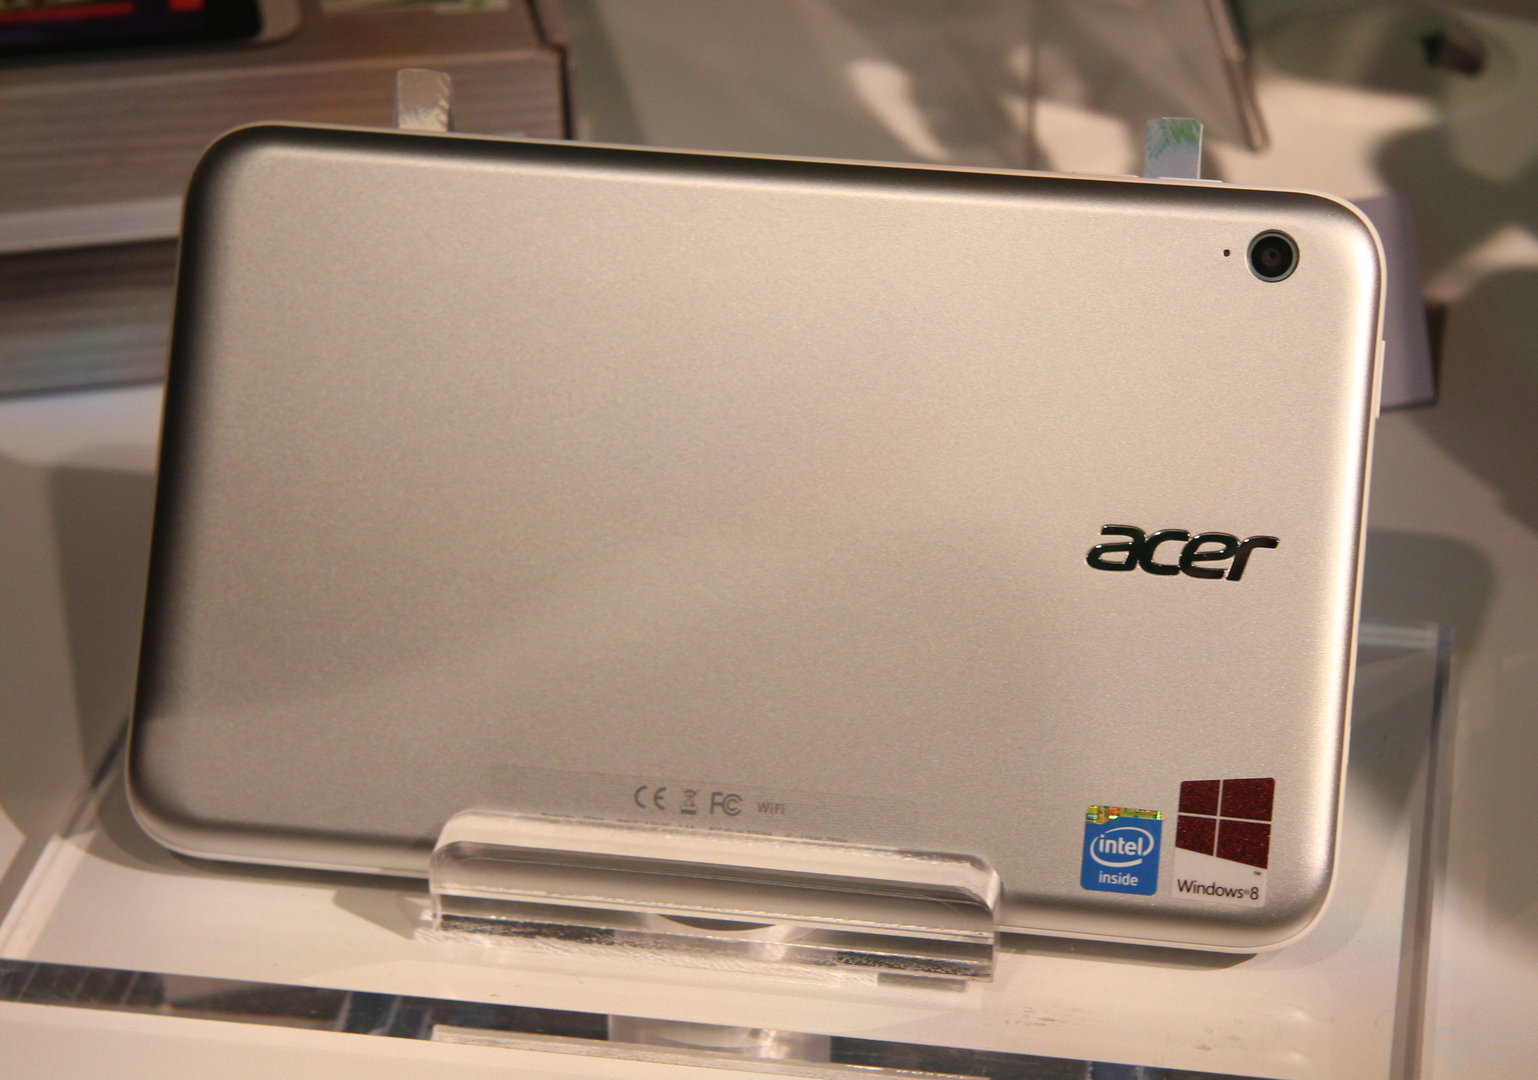 Acer Iconia W3 Tablet